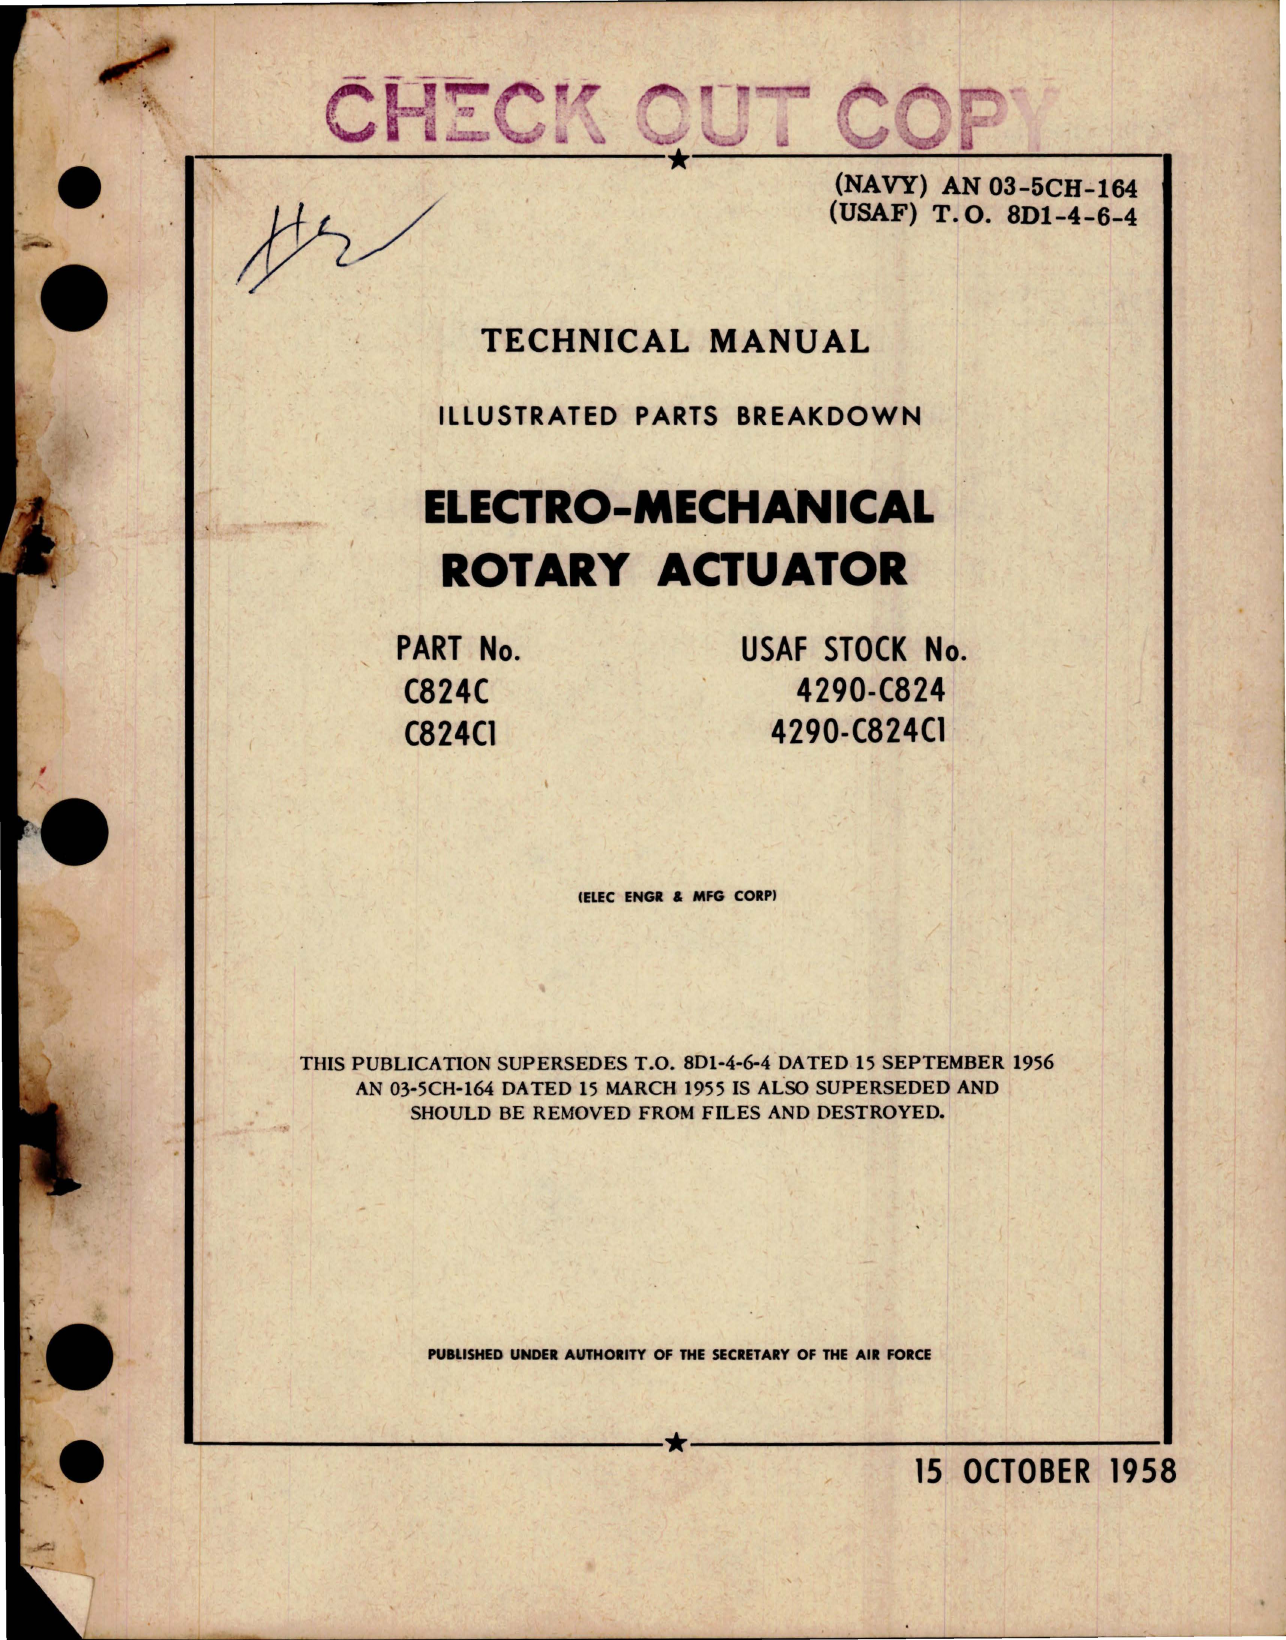 Sample page 1 from AirCorps Library document: Illustrated Parts Breakdown for Electro-Mechanical Rotary Actuator - Part C824C and C824C1 